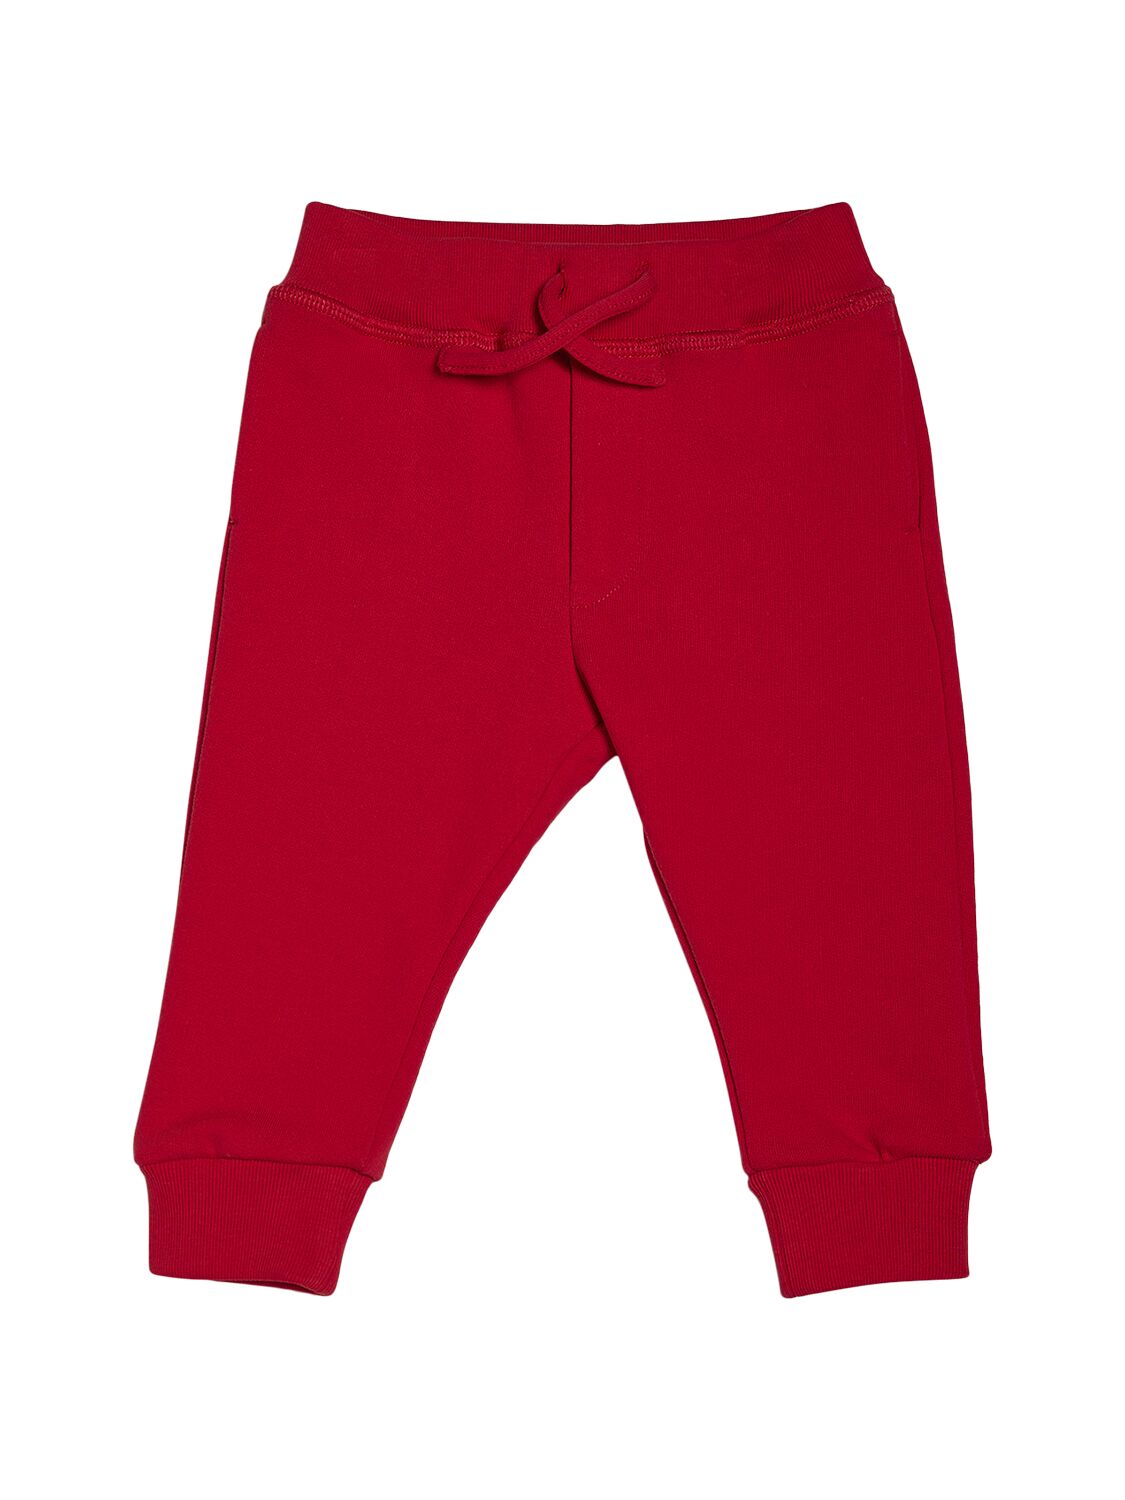 Dsquared2 Kids' Logo Print Cotton Sweatpants In Red